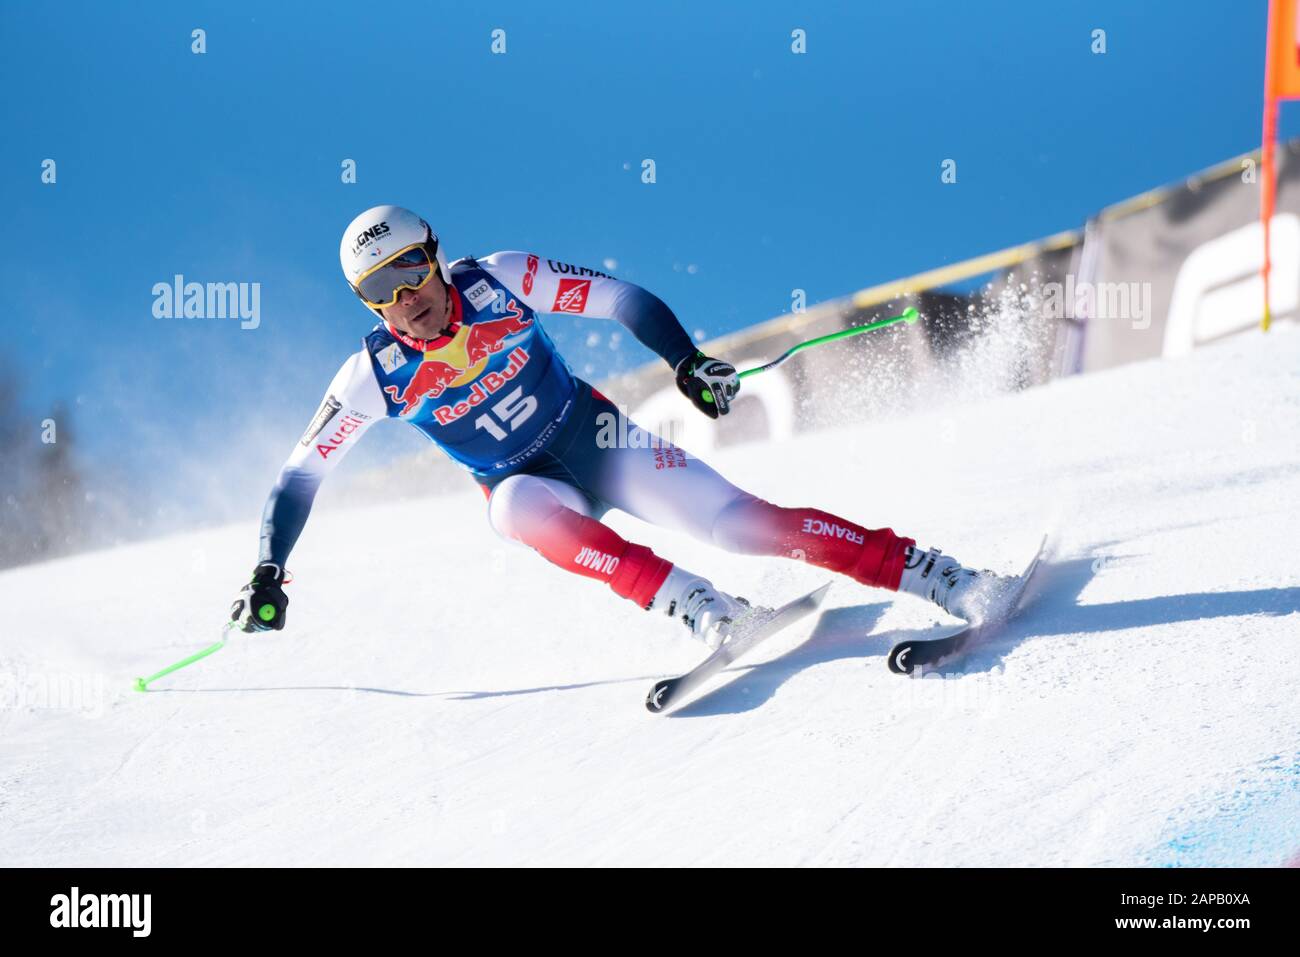 Johan Clarey of France at the Ski Alpin: 80. Hahnenkamm Race 2020 - Audi FIS Alpine Ski World Cup - Men's Downhill Training at the Streif on January 22, 2020 in Kitzbuehel, AUSTRIA. (Photo by Horst Ettensberger/ESPA-Images) Stock Photo